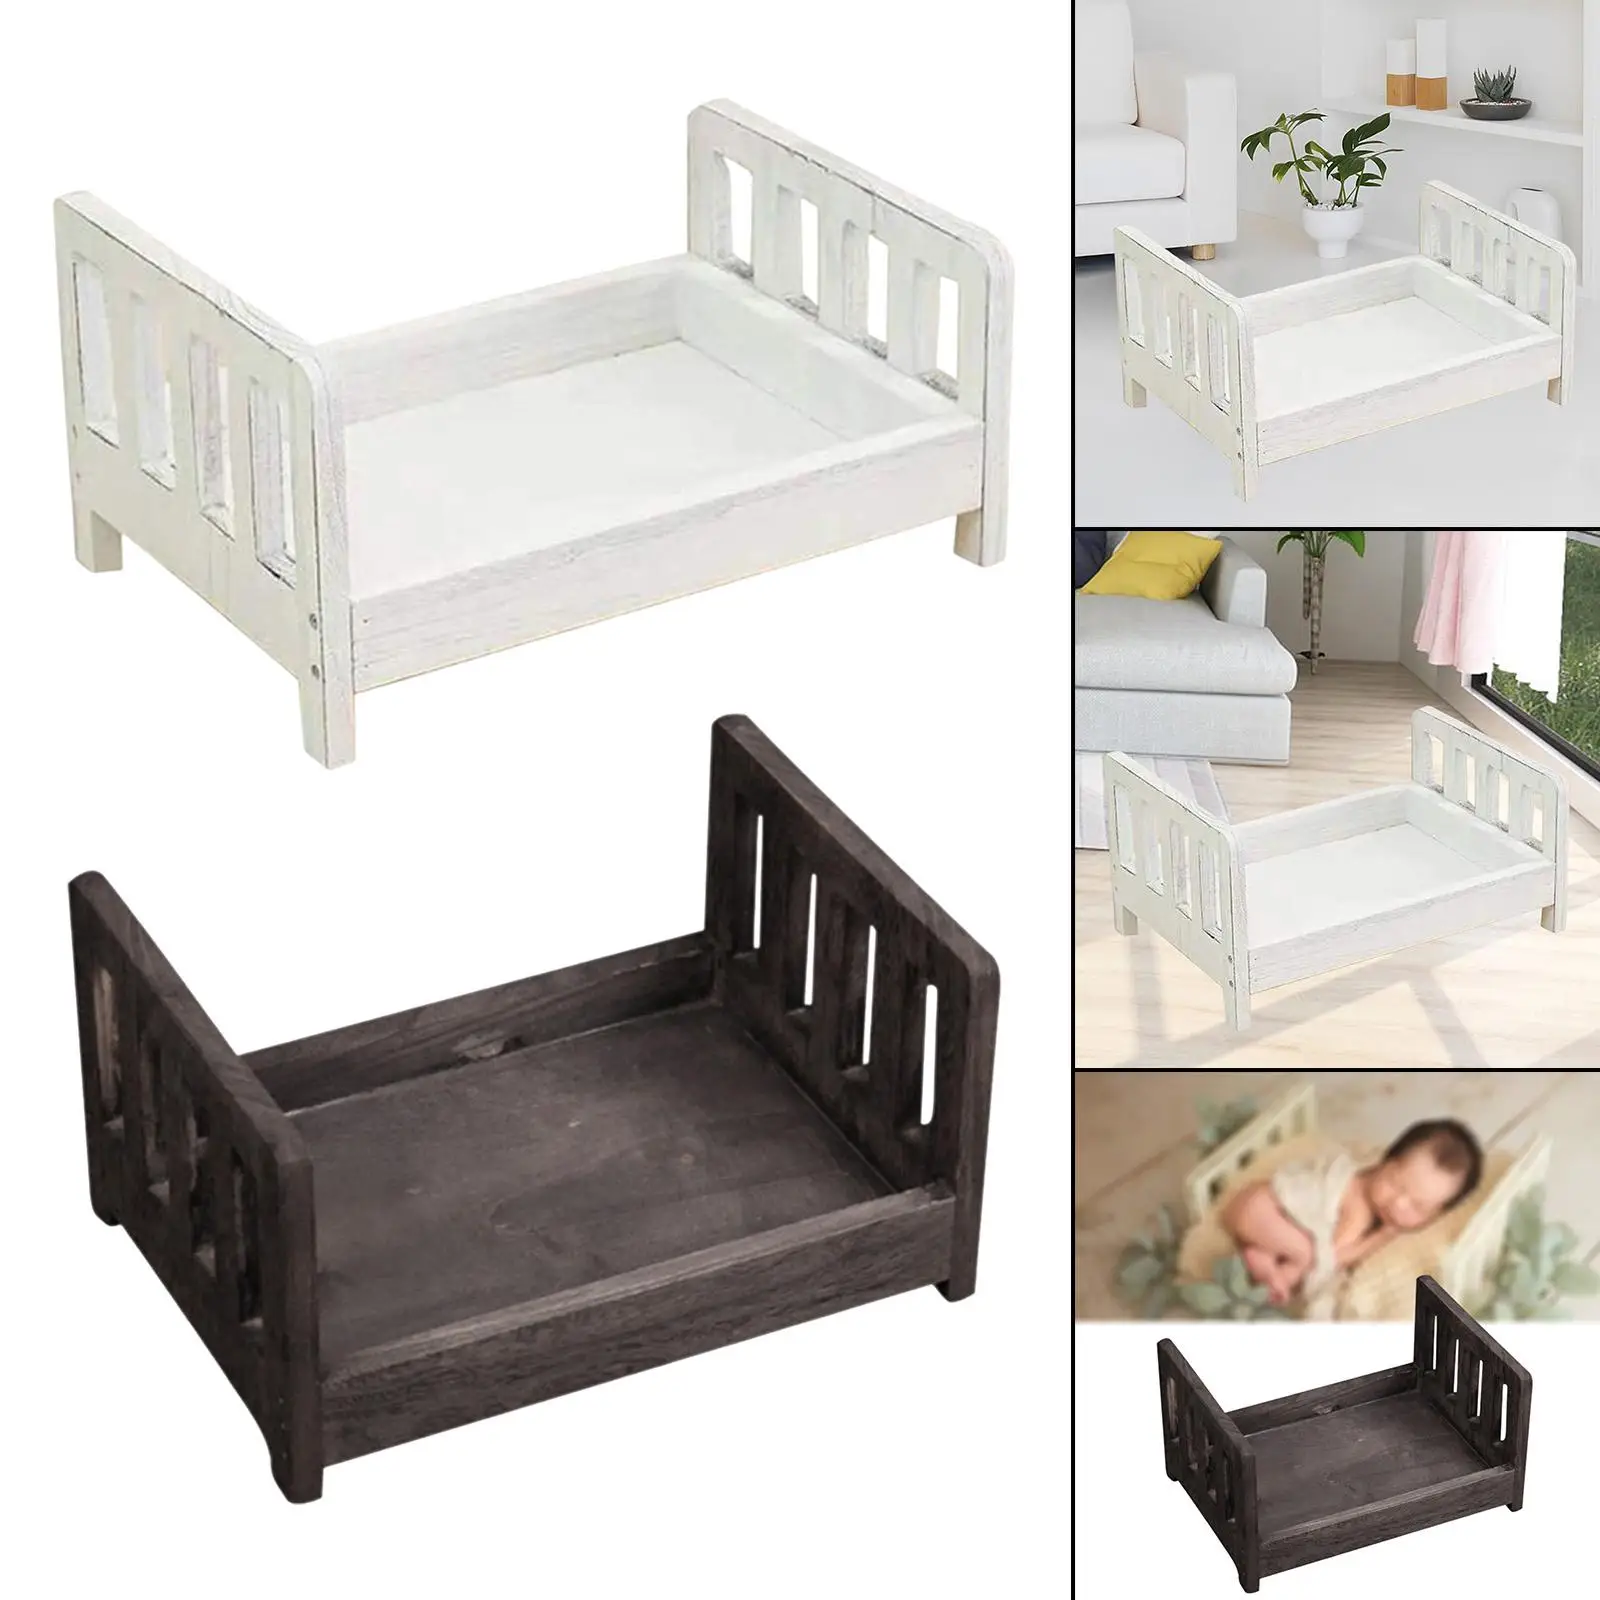 Photography Wooden Bed Photography Props Mini for Photoshoot Backdrops Girls